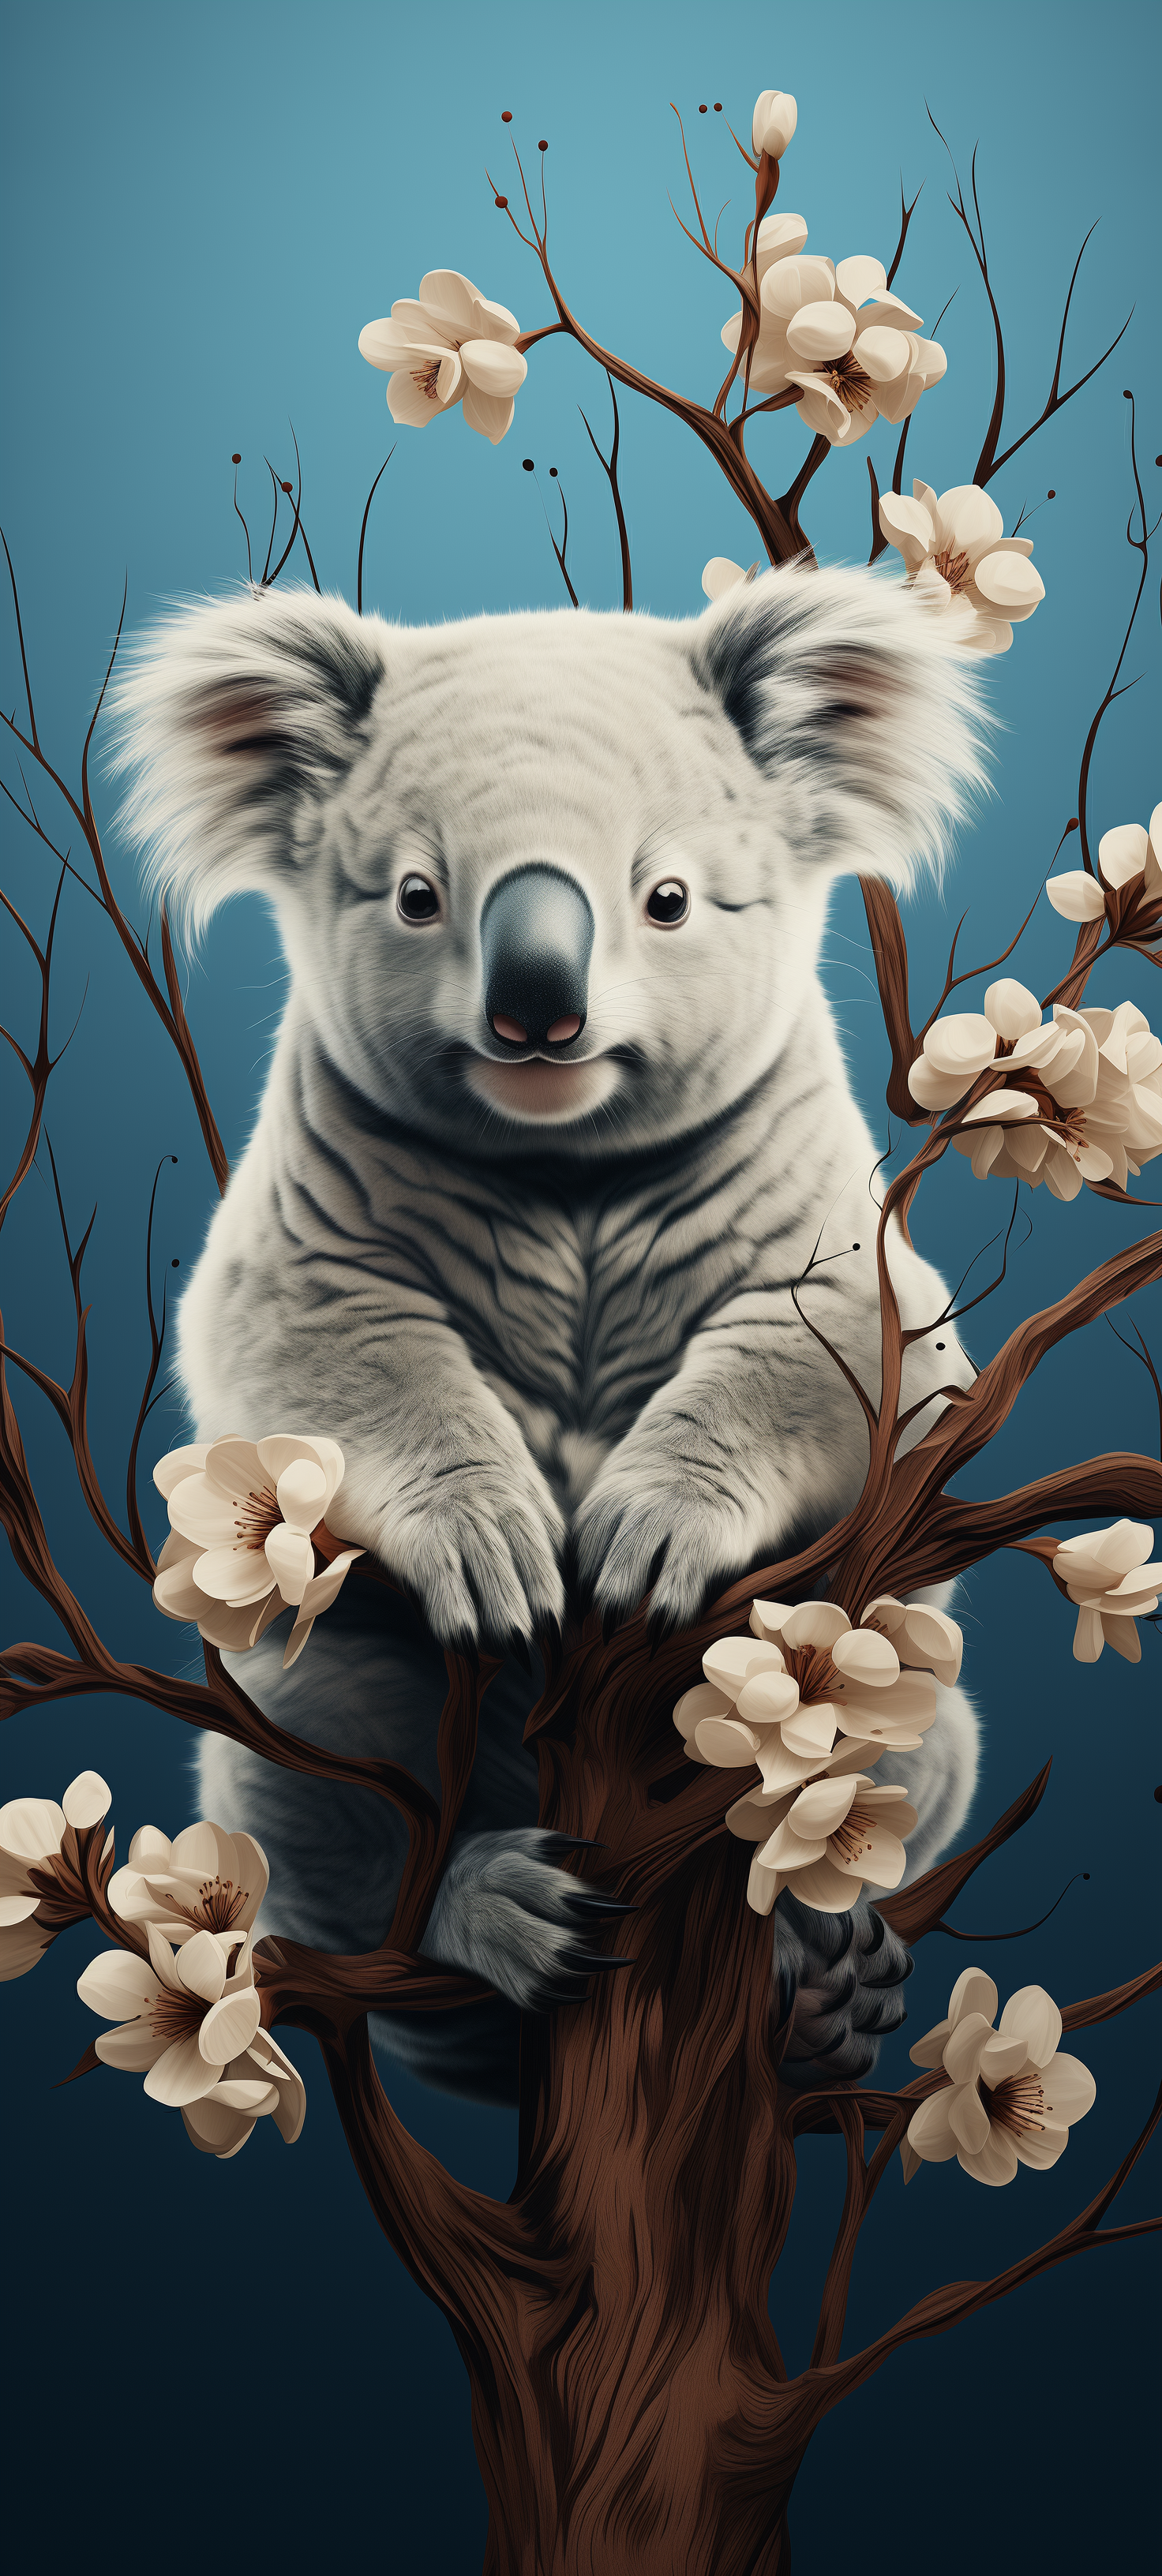 Adorable koala sitting on a blossoming tree branch against a blue background – perfect for a phone wallpaper.